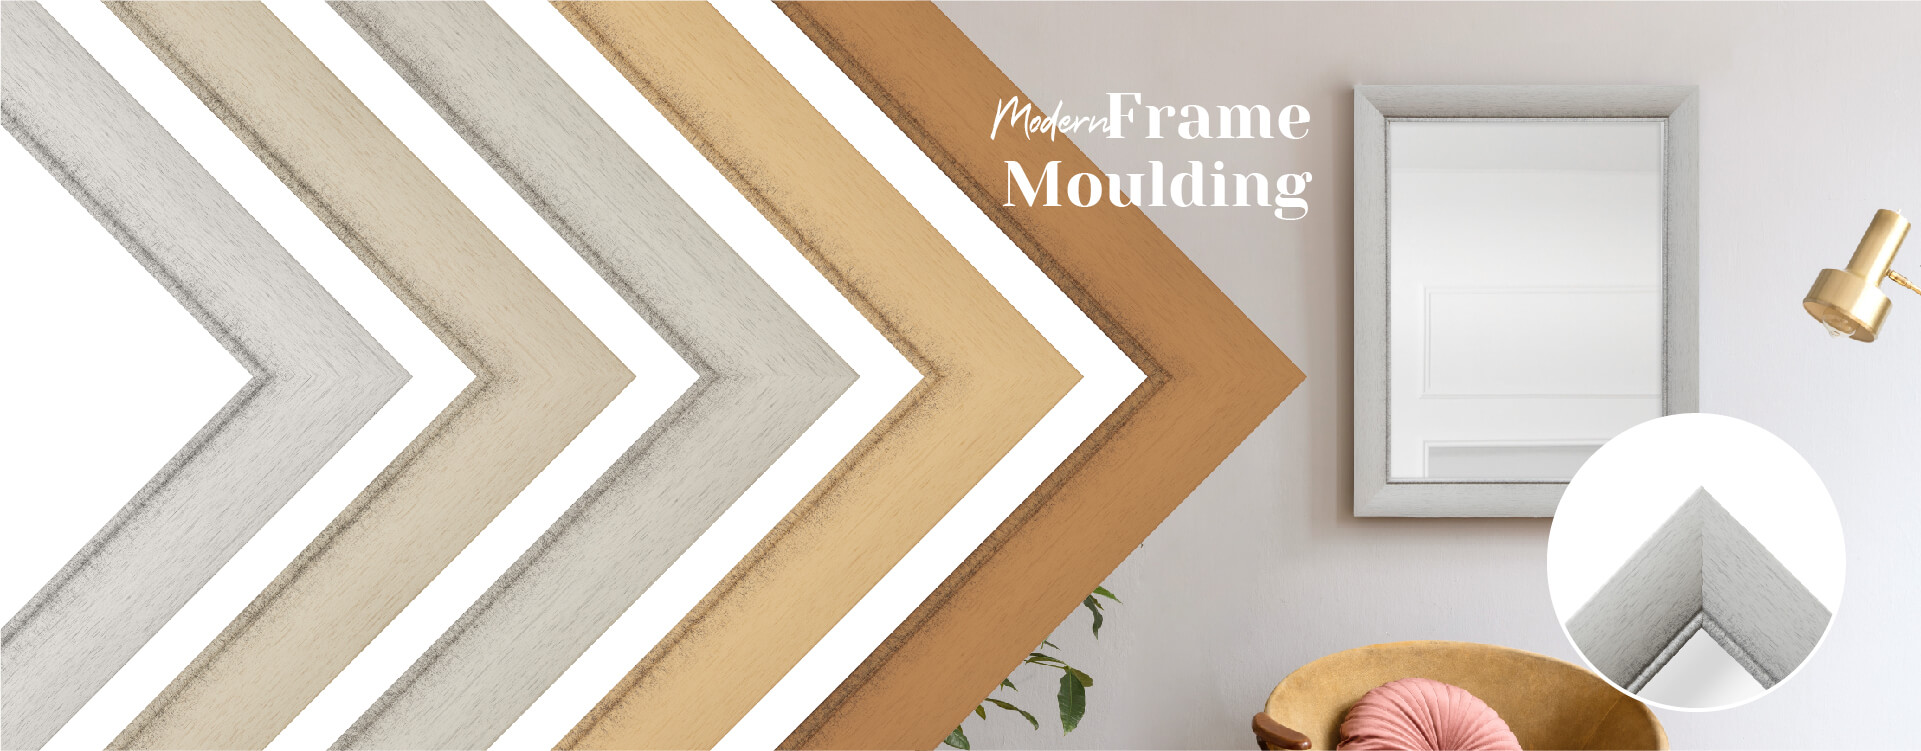 contemporary picture frame mouldings for mirror frame